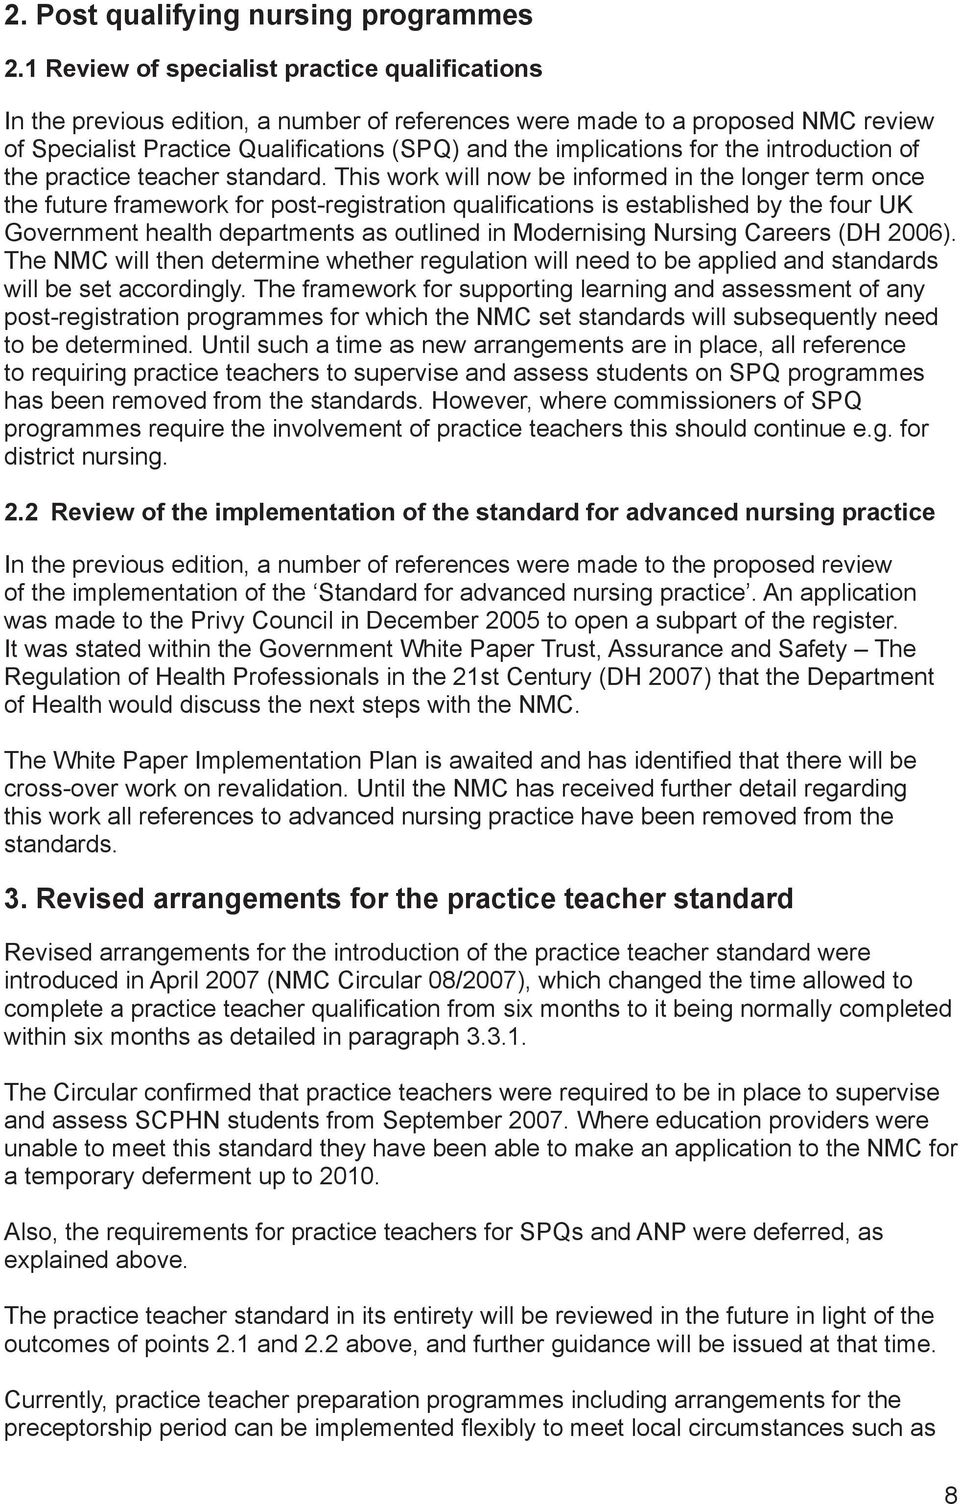 the introduction of the practice teacher standard.